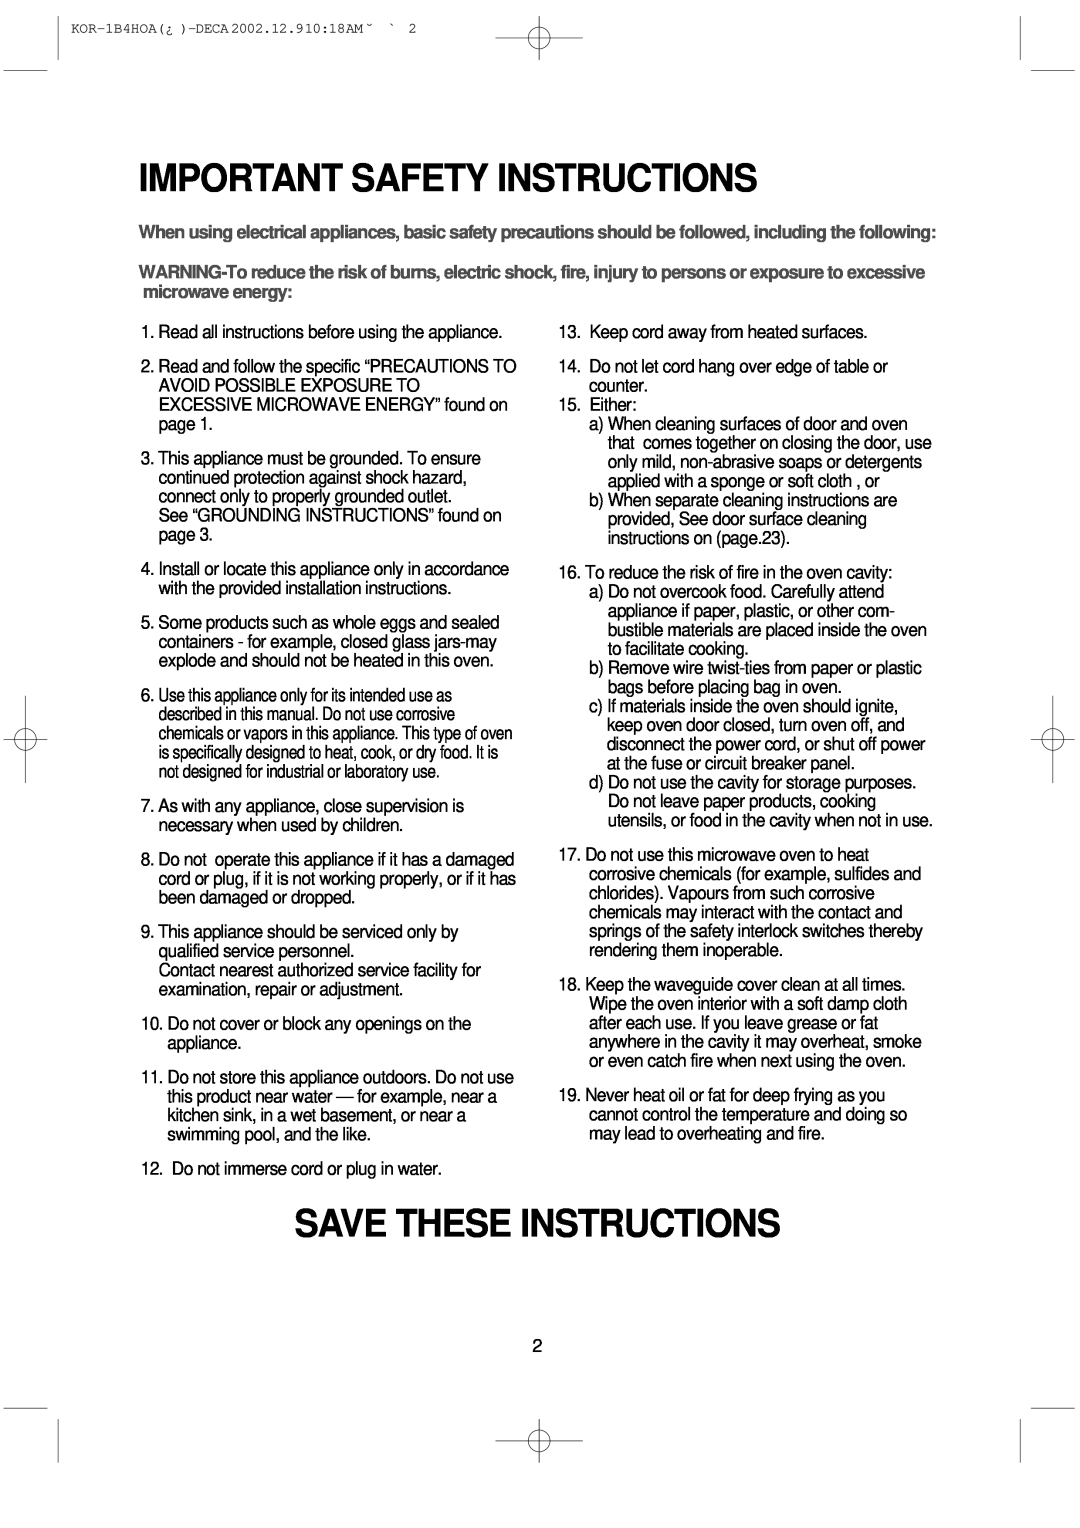 Daewoo KOR-1B4H manual Important Safety Instructions, Save These Instructions 